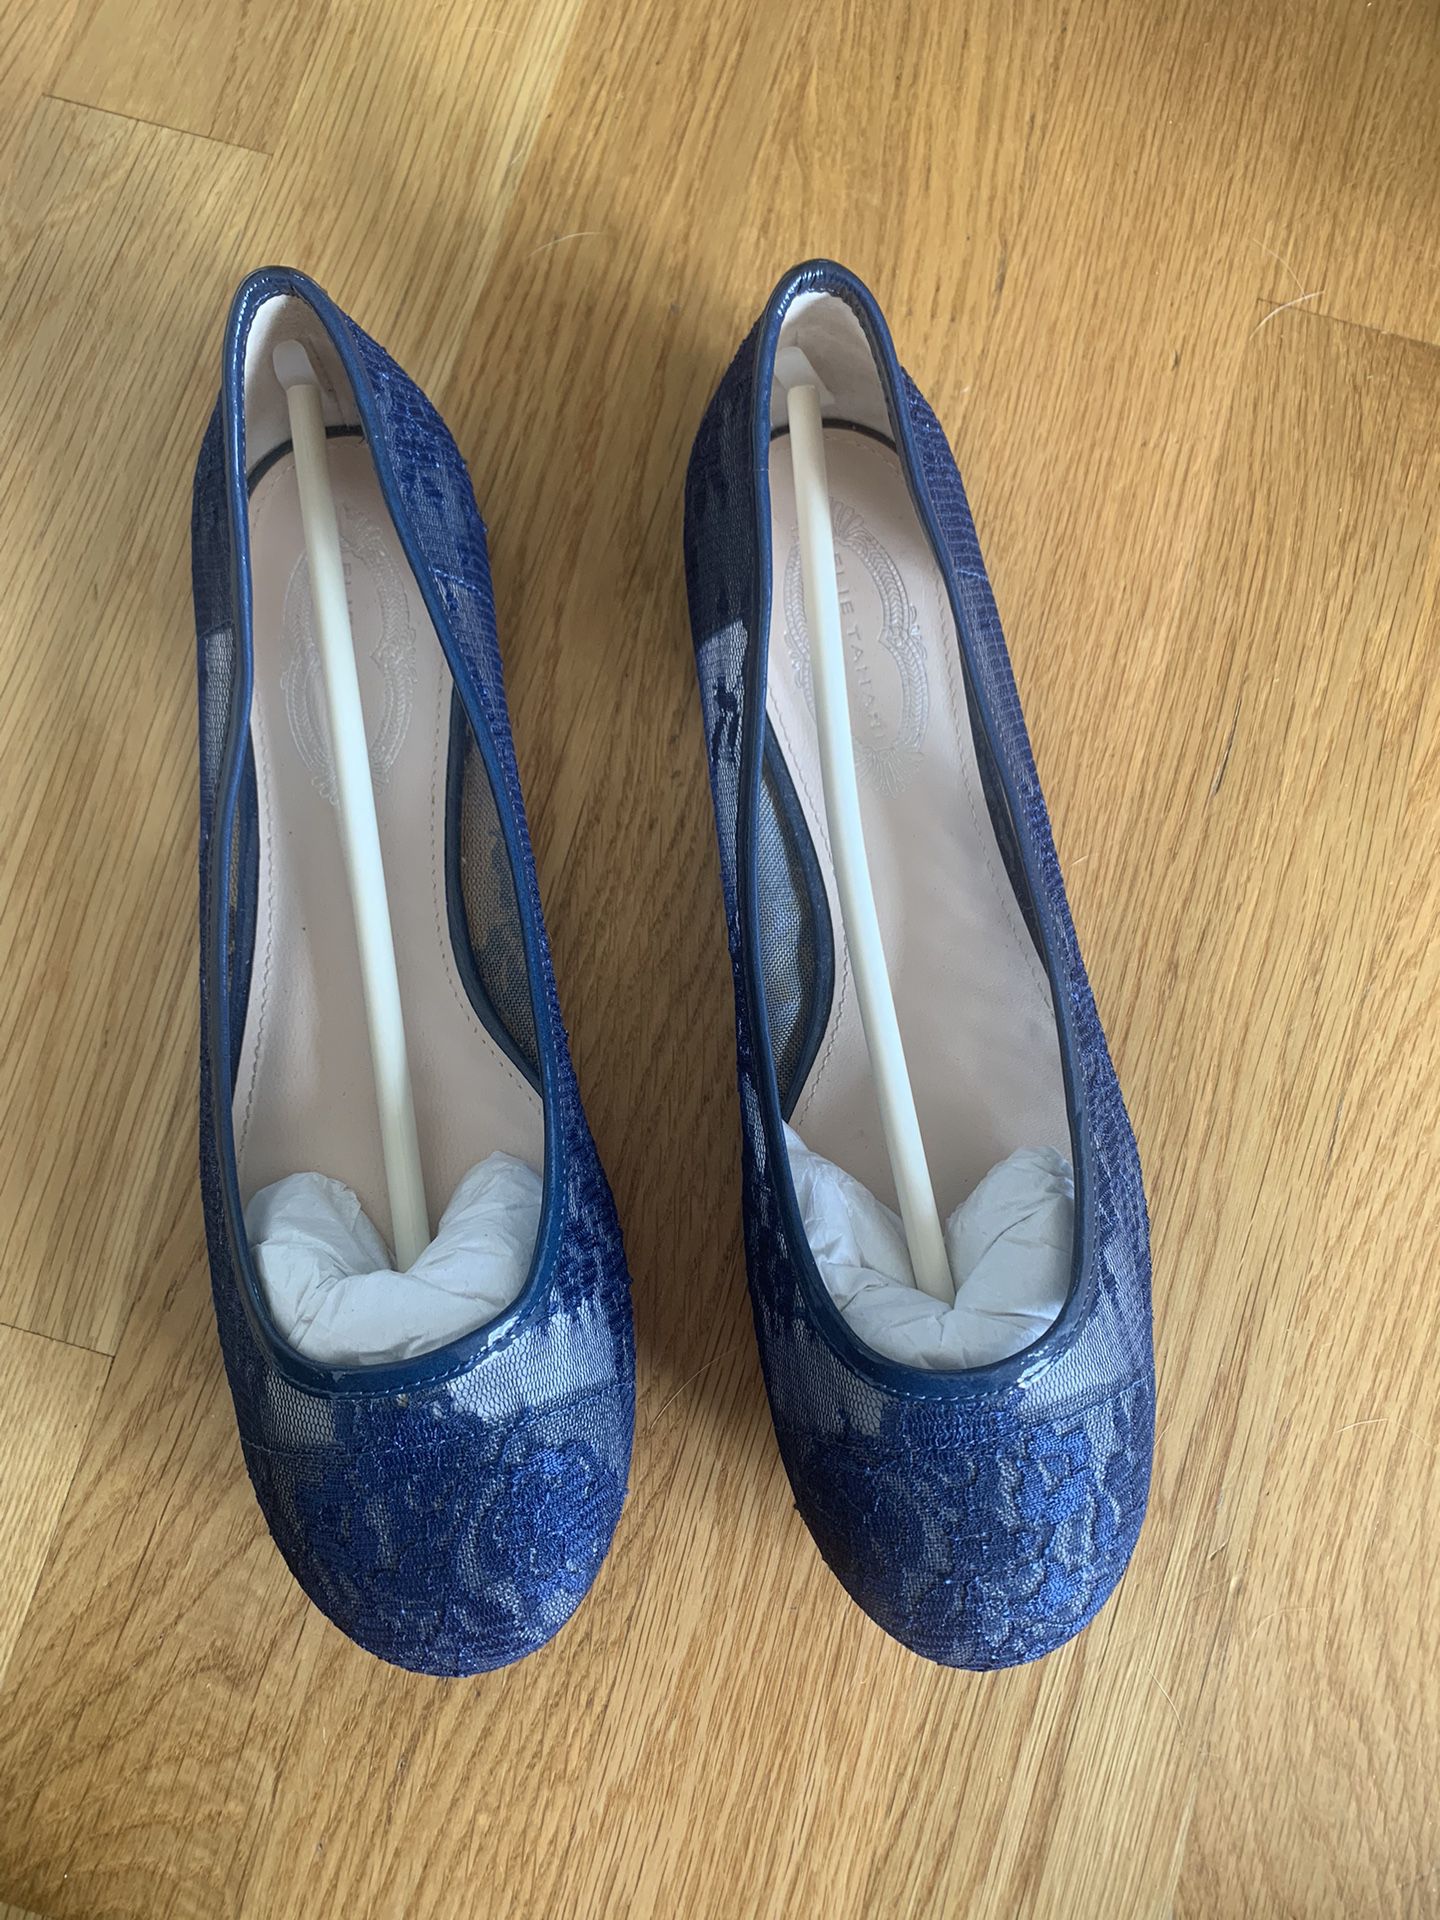 Gently Used Elie Tahari Size 7.5 Ballet Flats